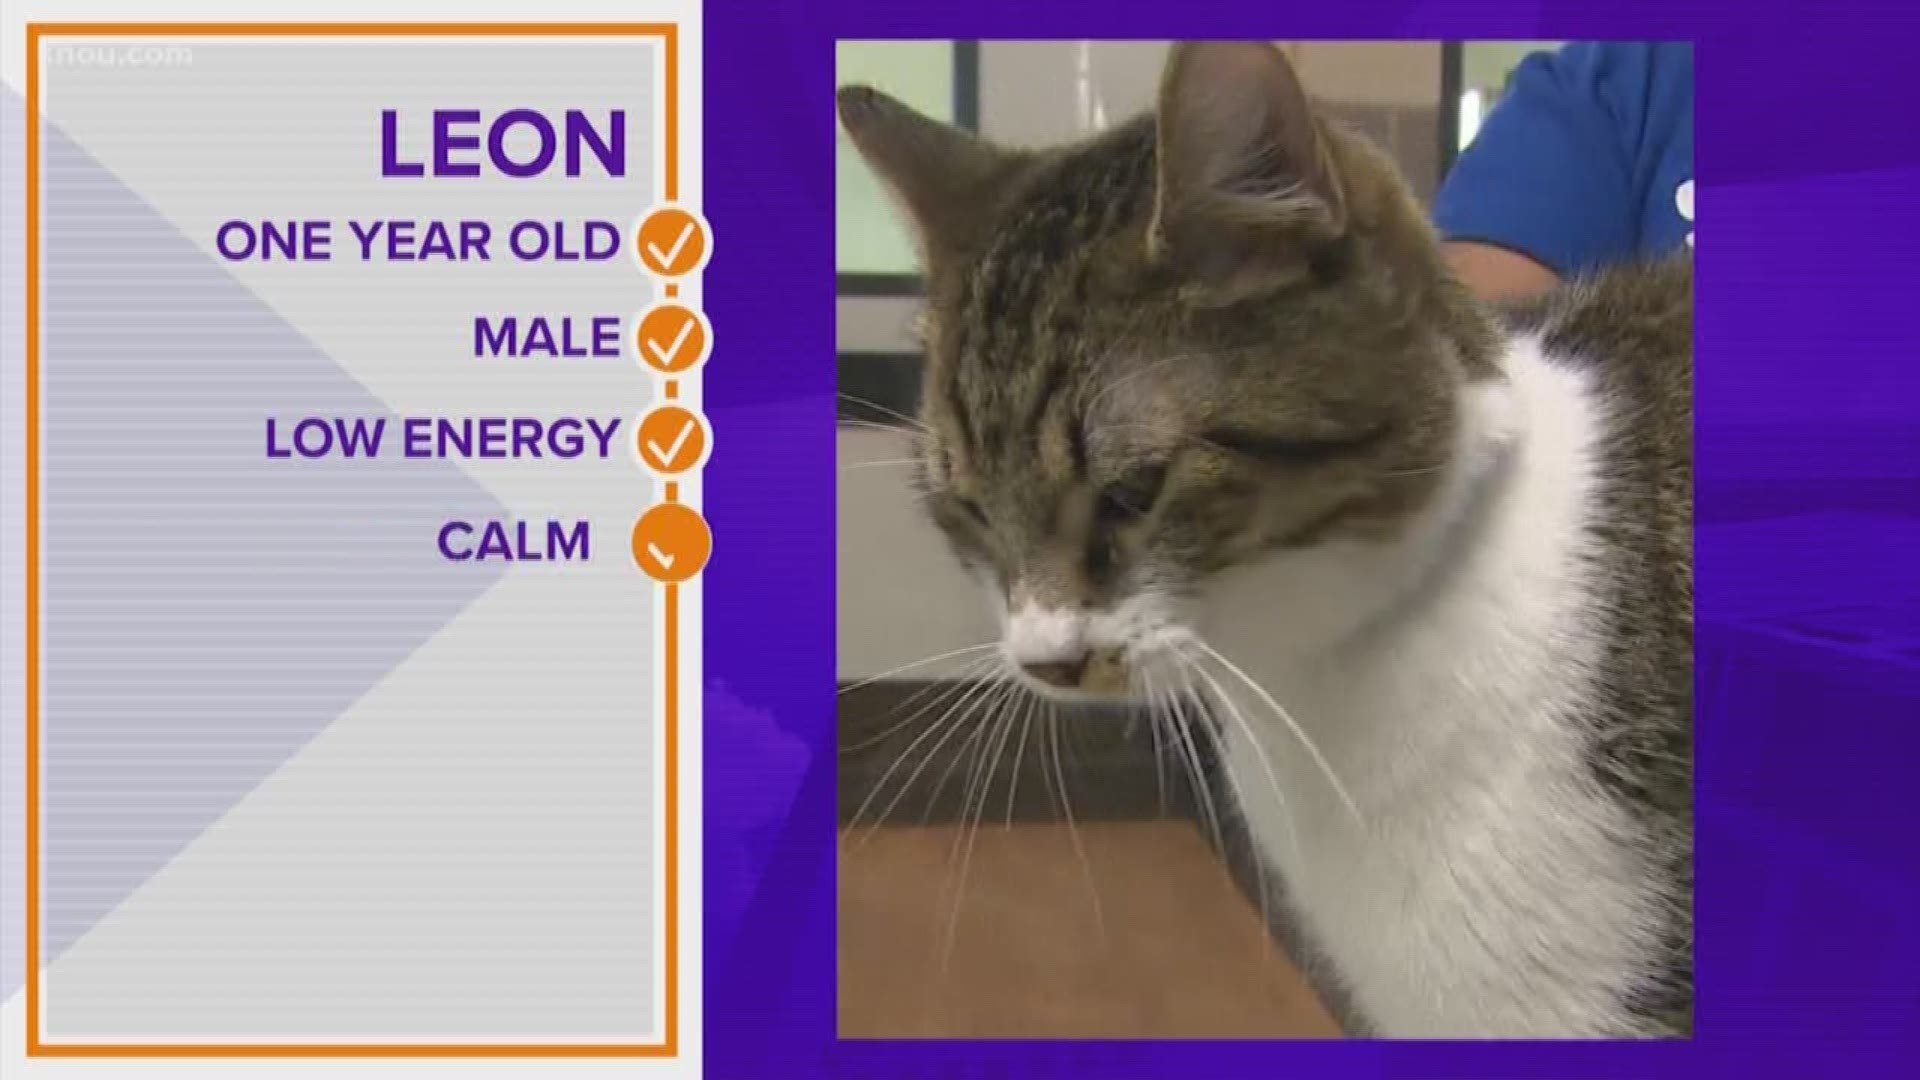 Leon is a one-year-old fella who would be purr-fect for anyone looking for a chill lap cat.